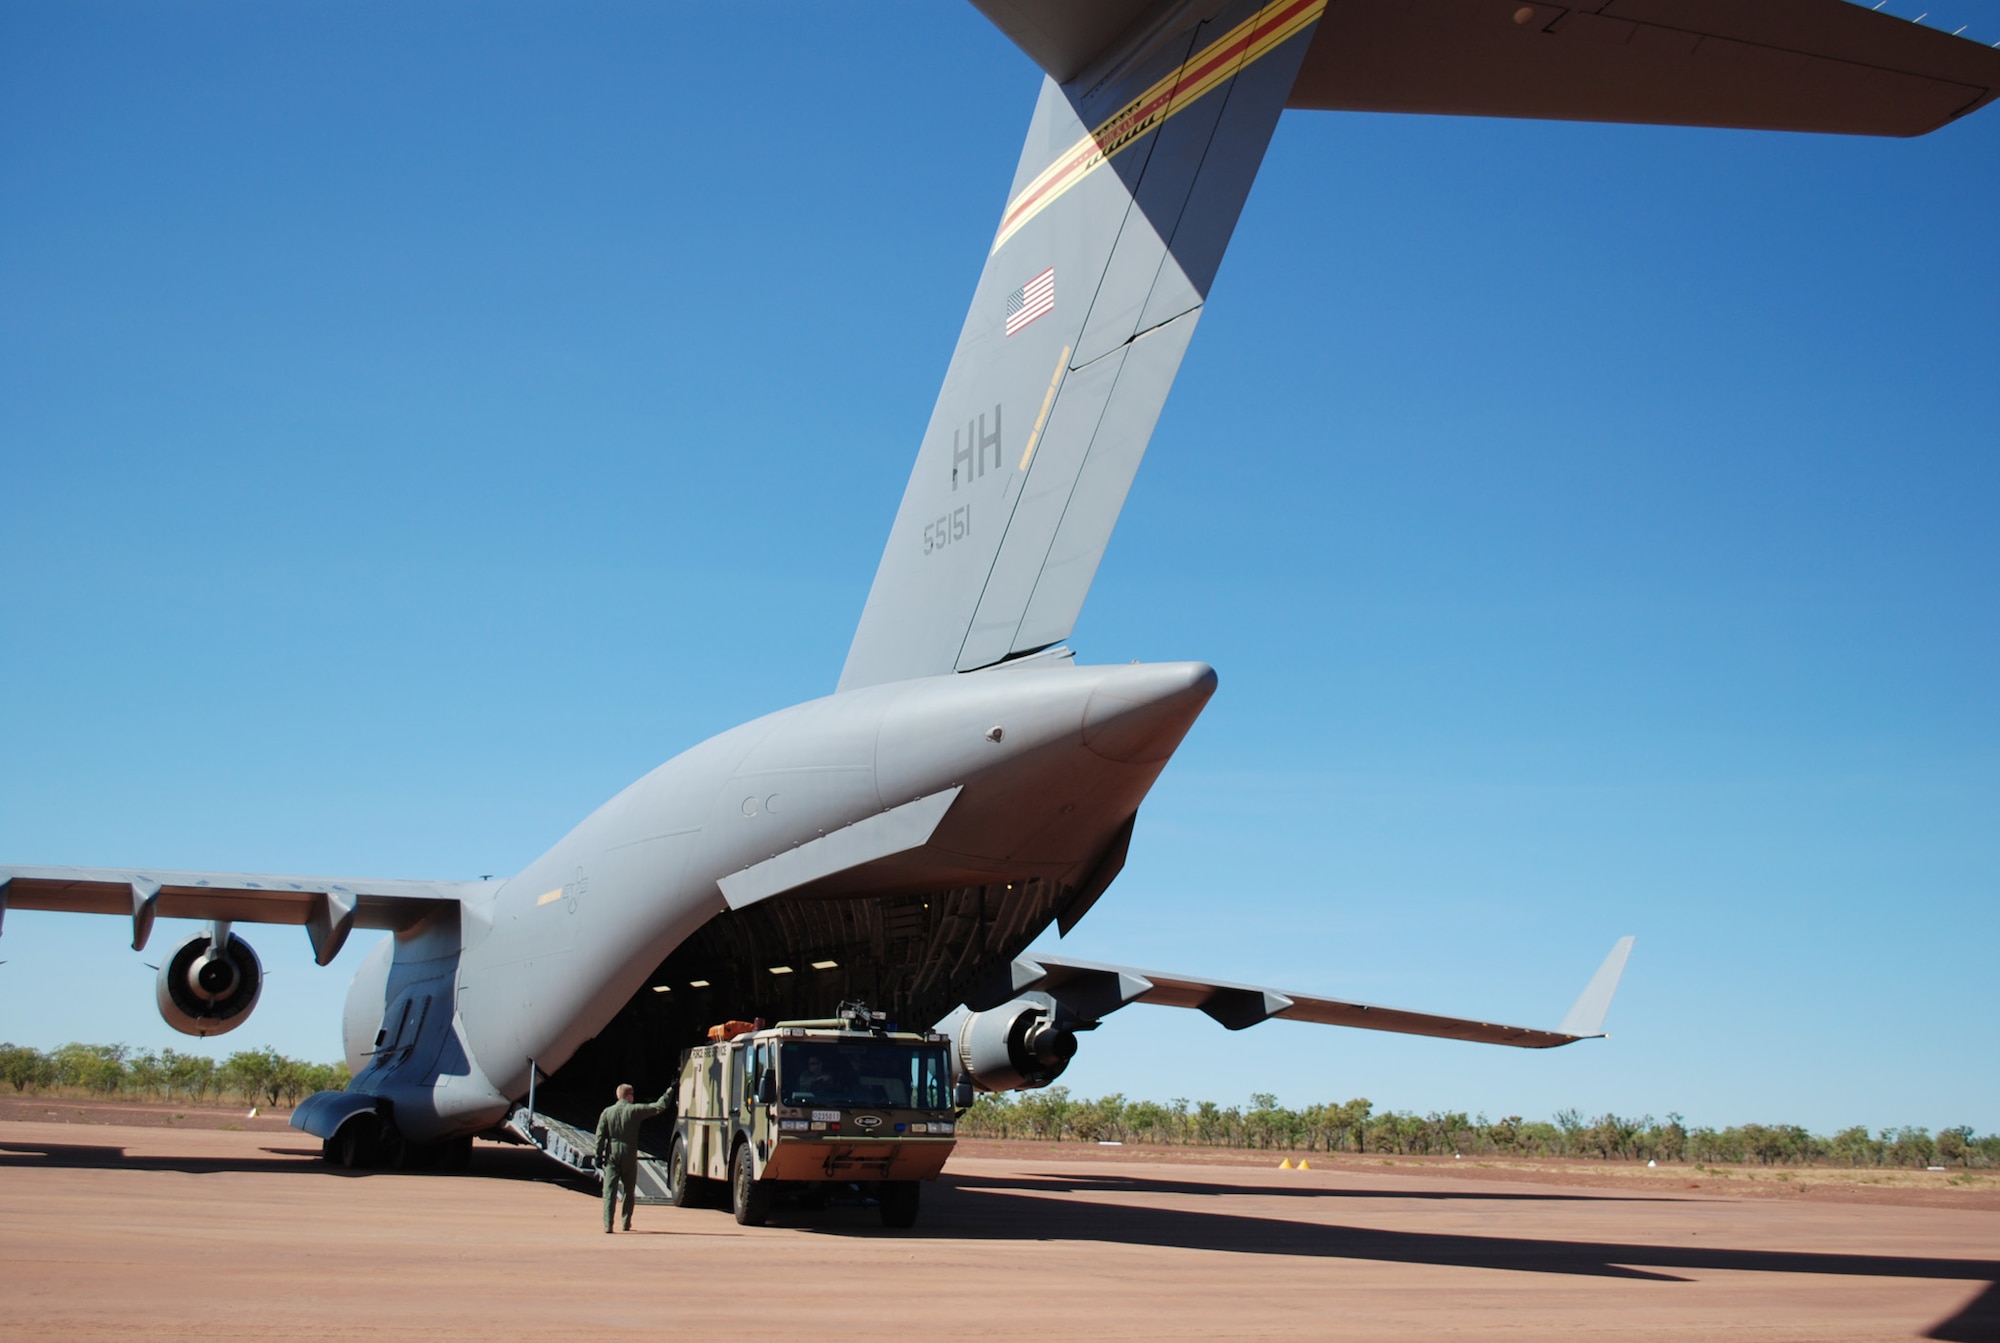 A Royal Australian Air Force E-One Titan is off-loaded July 19 at Bradshaw Field Training Area, Australia during Talisman Saber 2009. The fire truck and a six-member fire team of three U.S. and three Australian firefighters were airlifted via C-17 Globemaster III. (U.S. Air Force photo/Capt. Bryan Lewis)